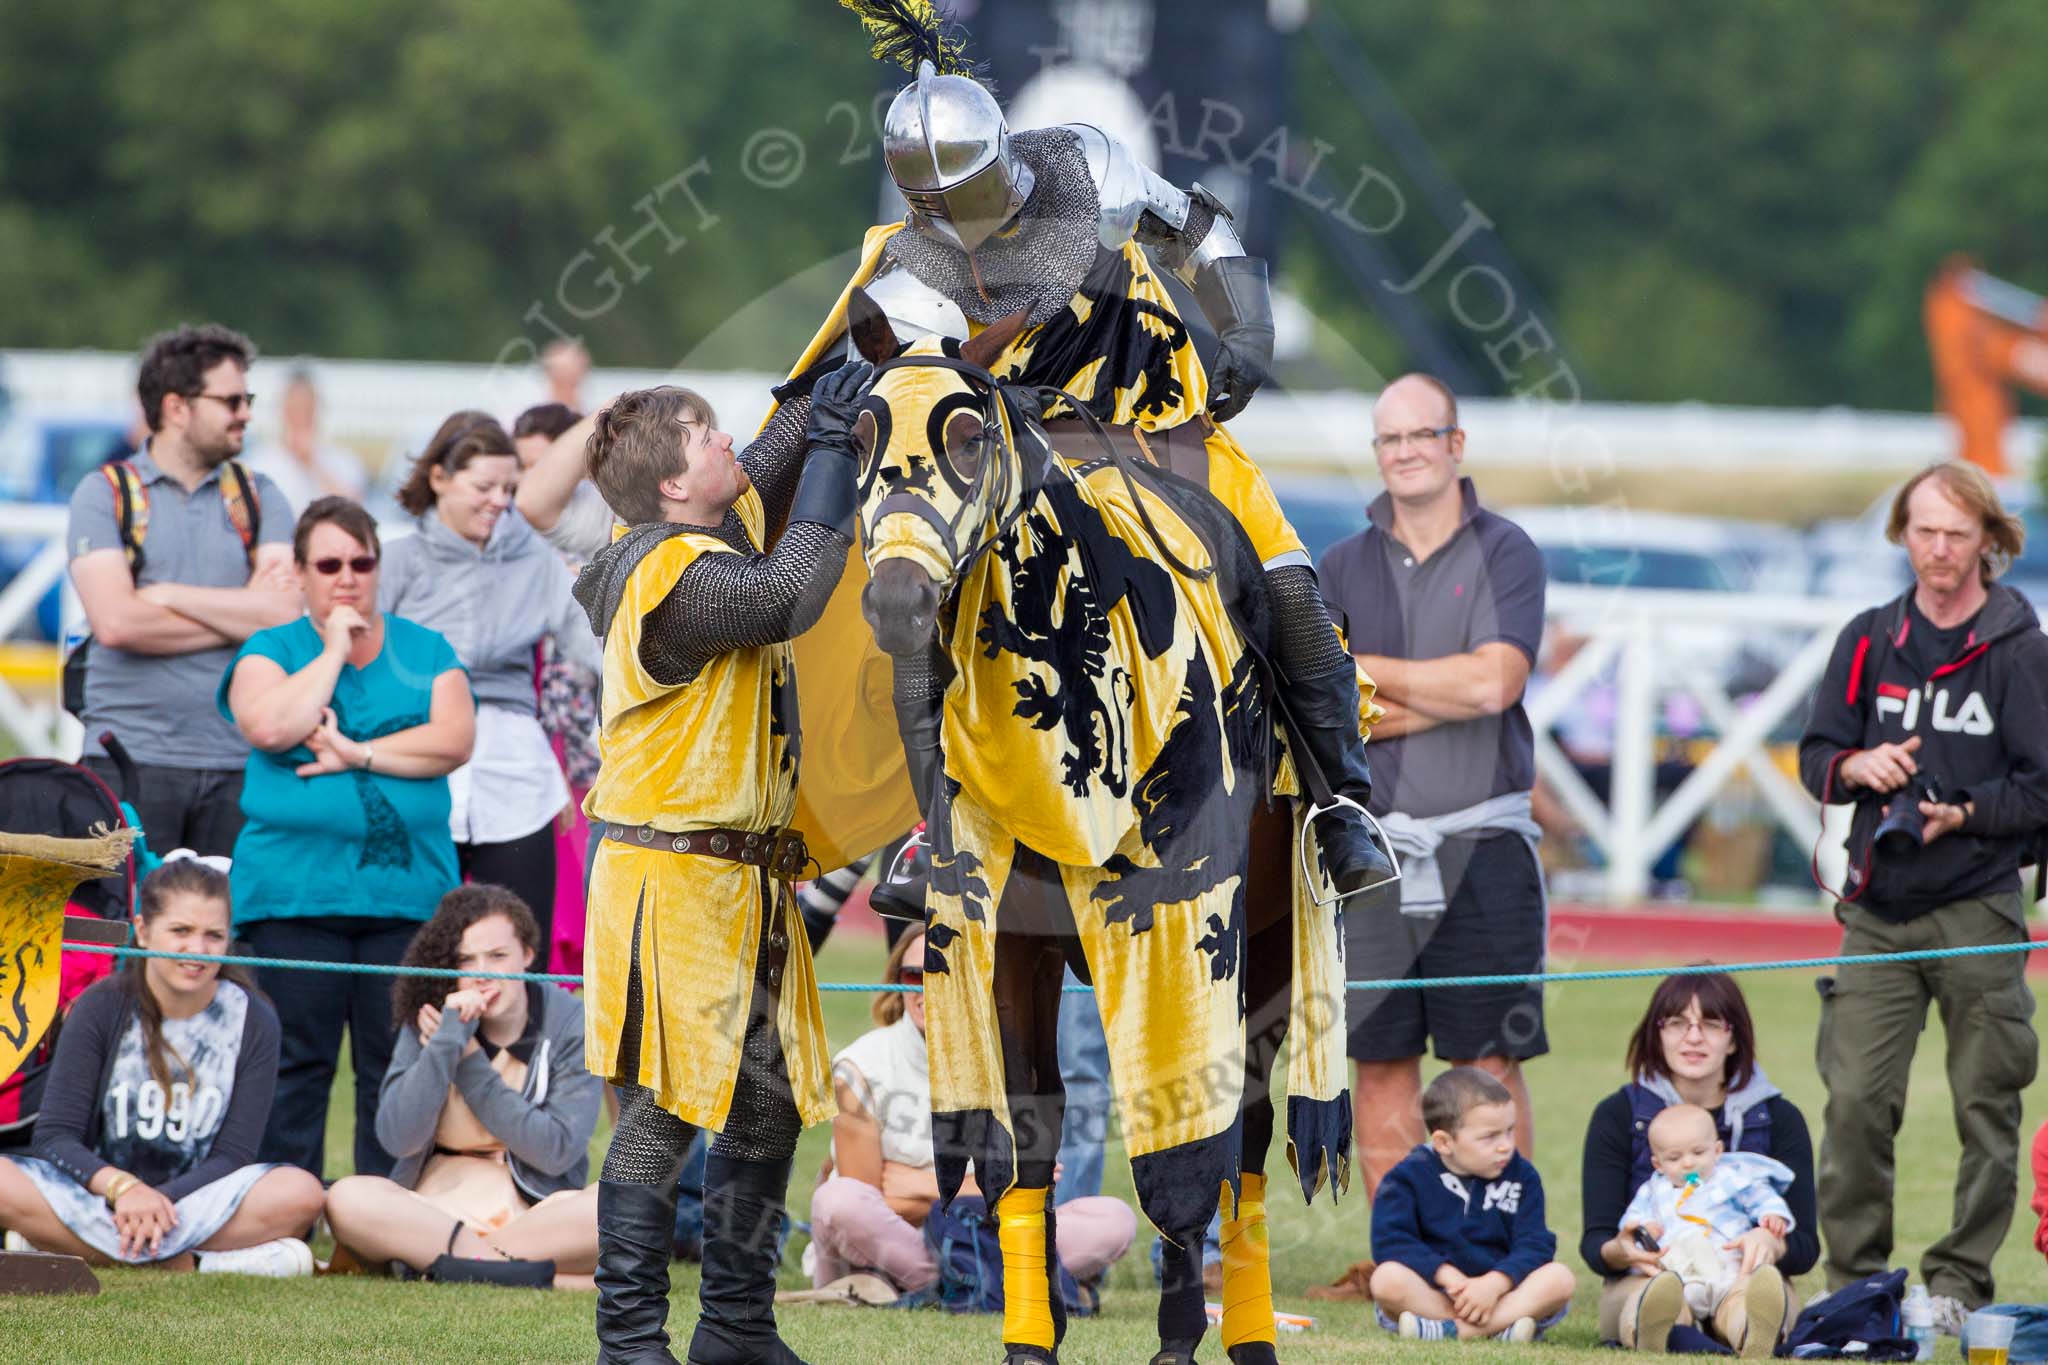 DBPC Polo in the Park 2013 - jousting display by the Knights of Middle England.
Dallas Burston Polo Club, ,
Southam,
Warwickshire,
United Kingdom,
on 01 September 2013 at 15:21, image #452